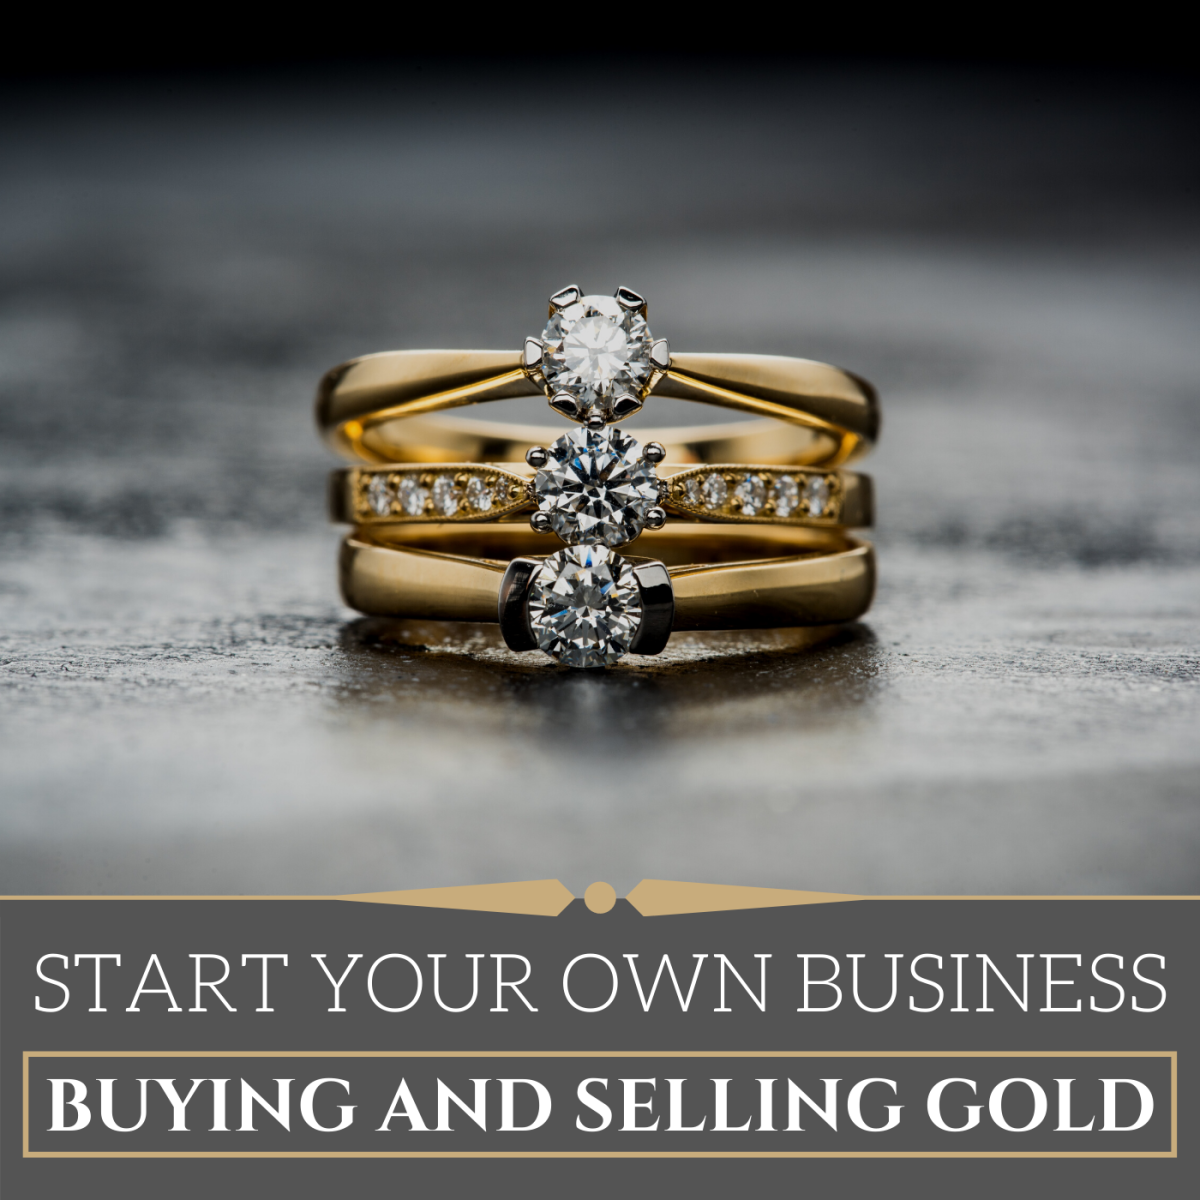 How to Start Your Own Business Buying and Selling Gold